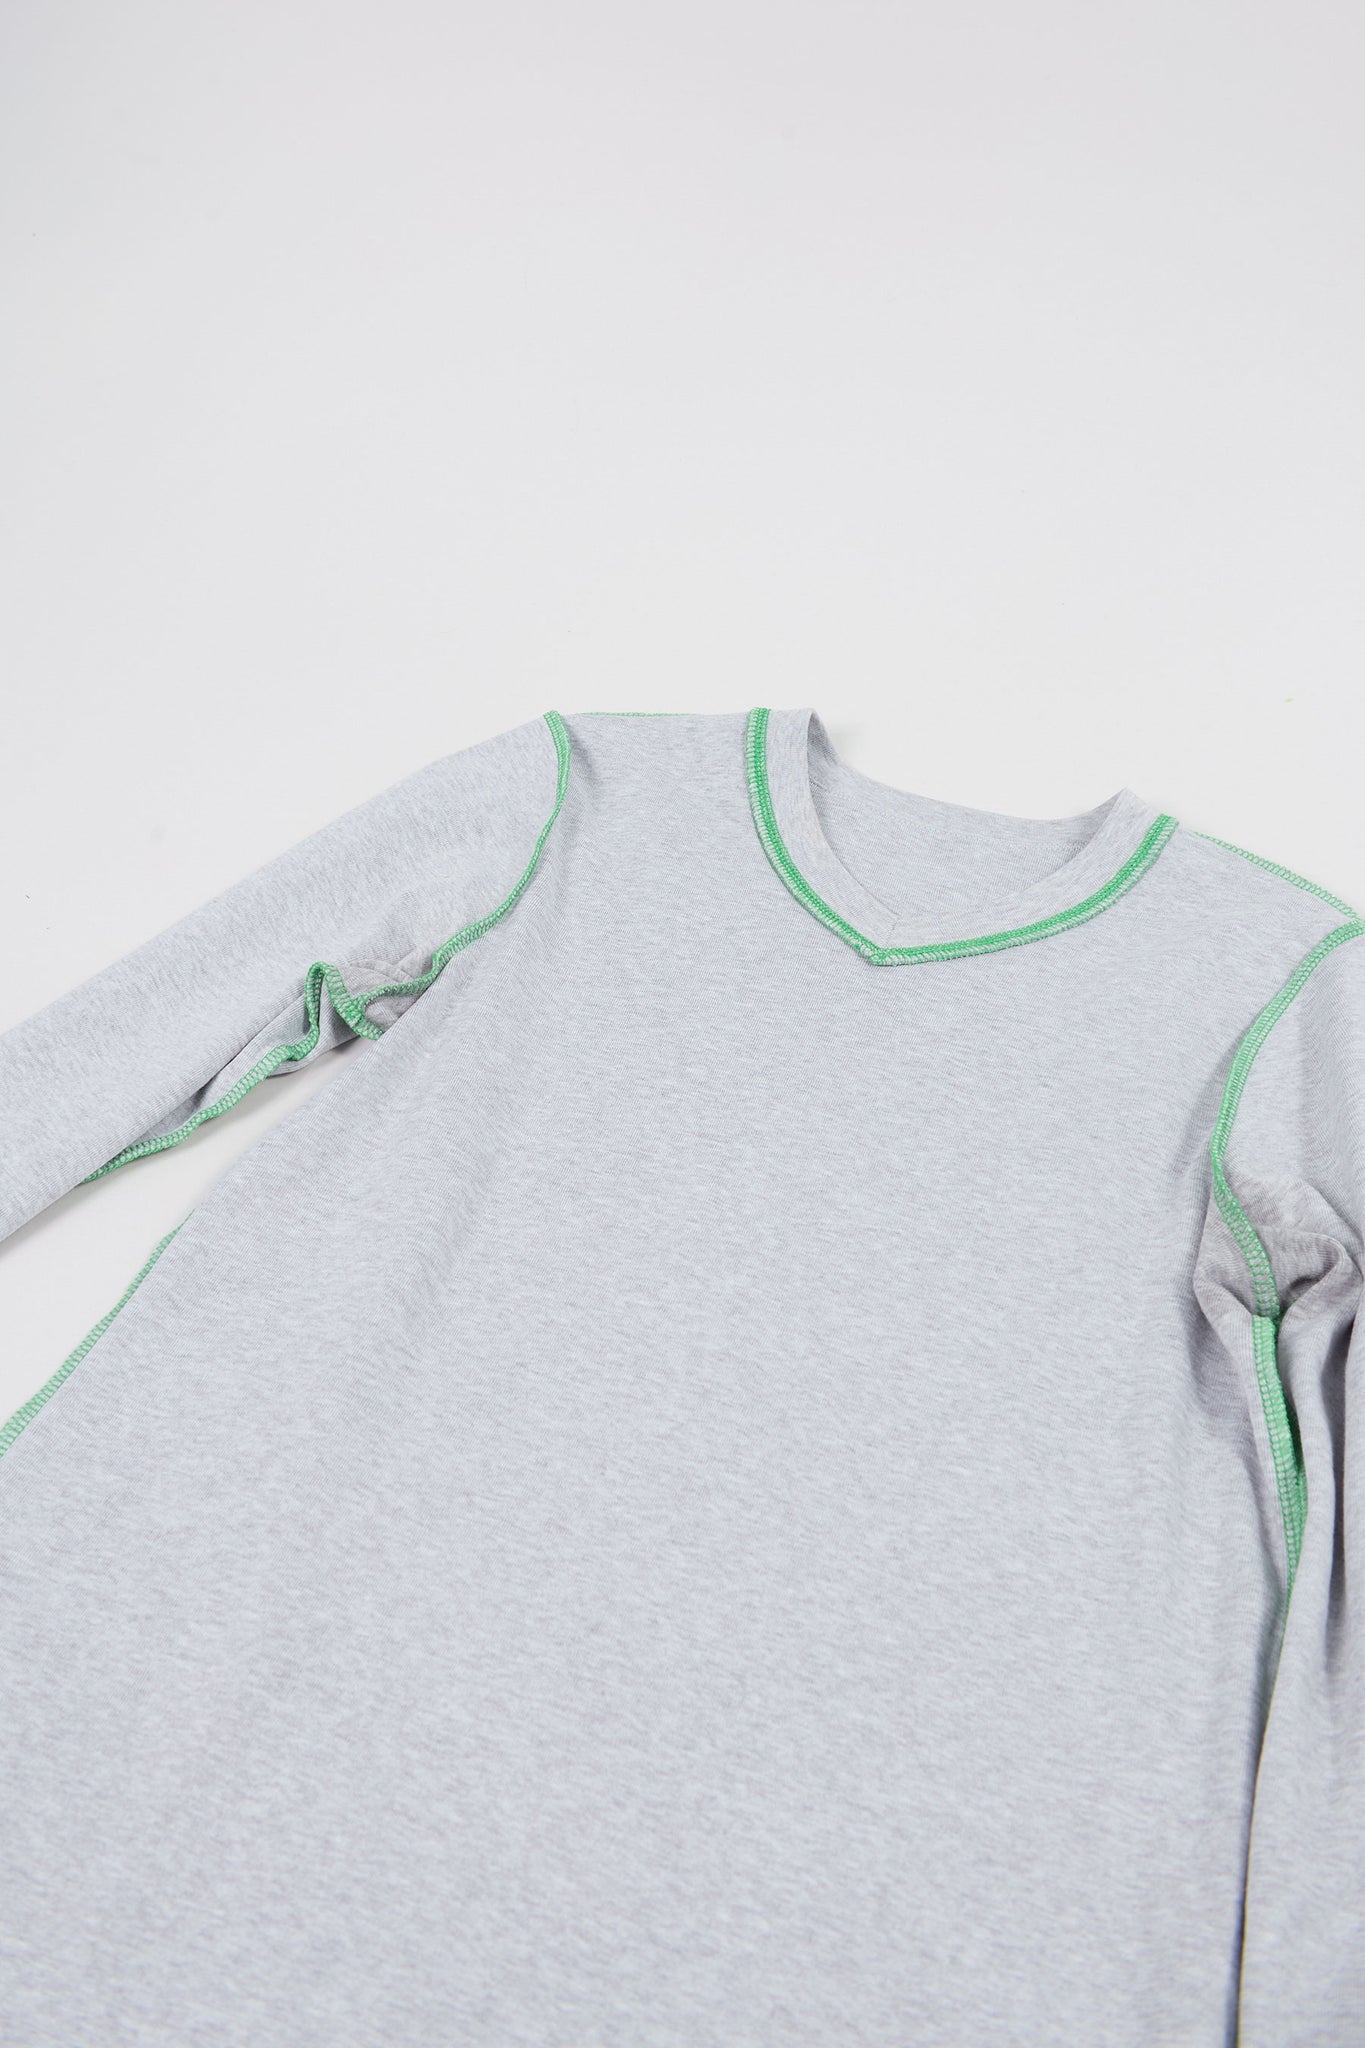 lay down of the heather grey micro vneck long sleeve tee reversed with pop color interior stitching in green